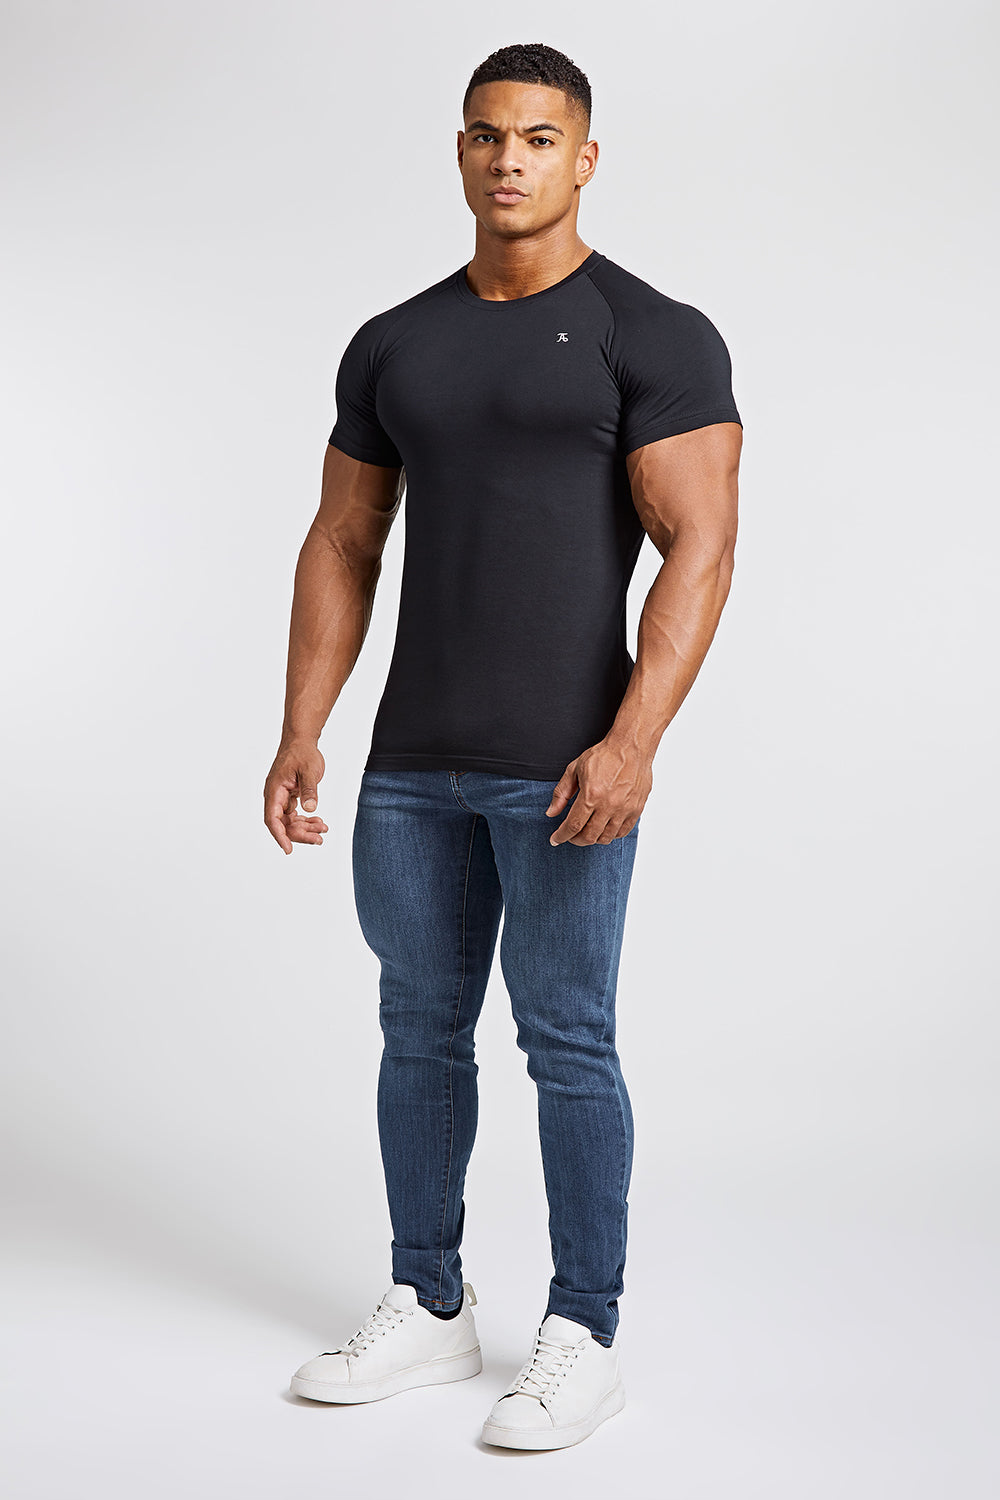 Athletic Fit T-Shirt in Black TAILORED ATHLETE - USA